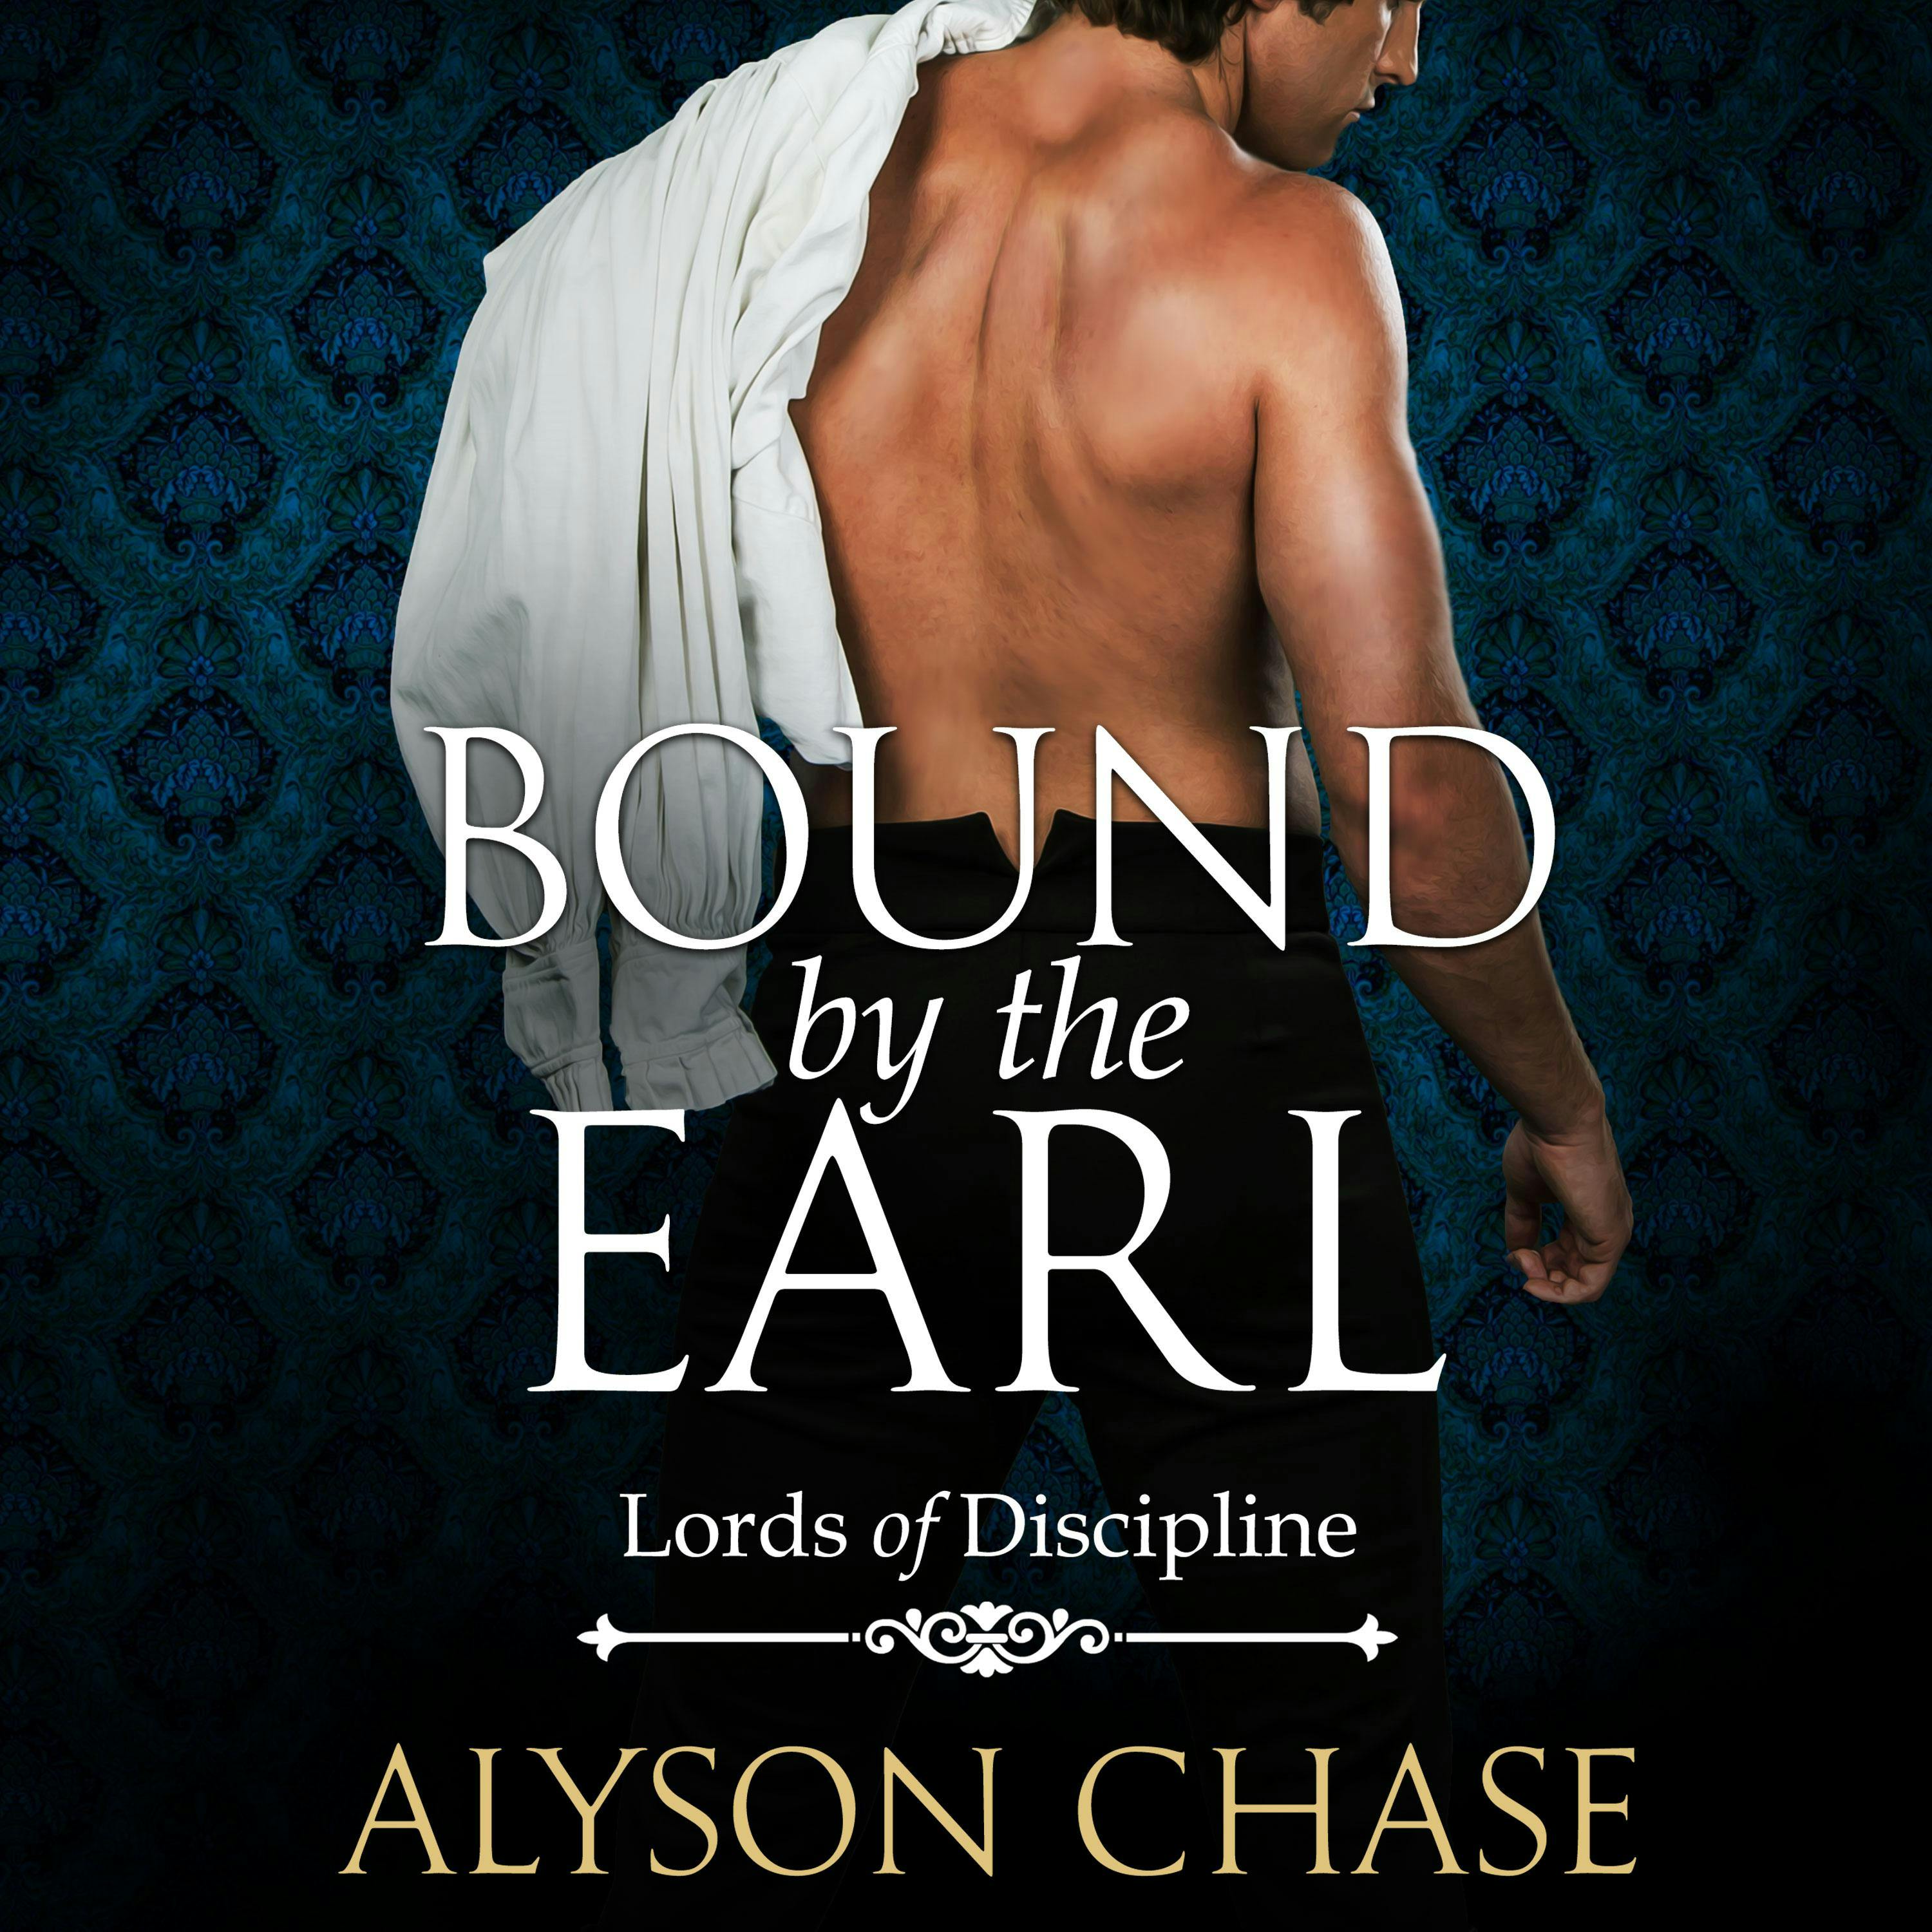 Bound by the Earl: Lords of Discipline - Alyson Chase